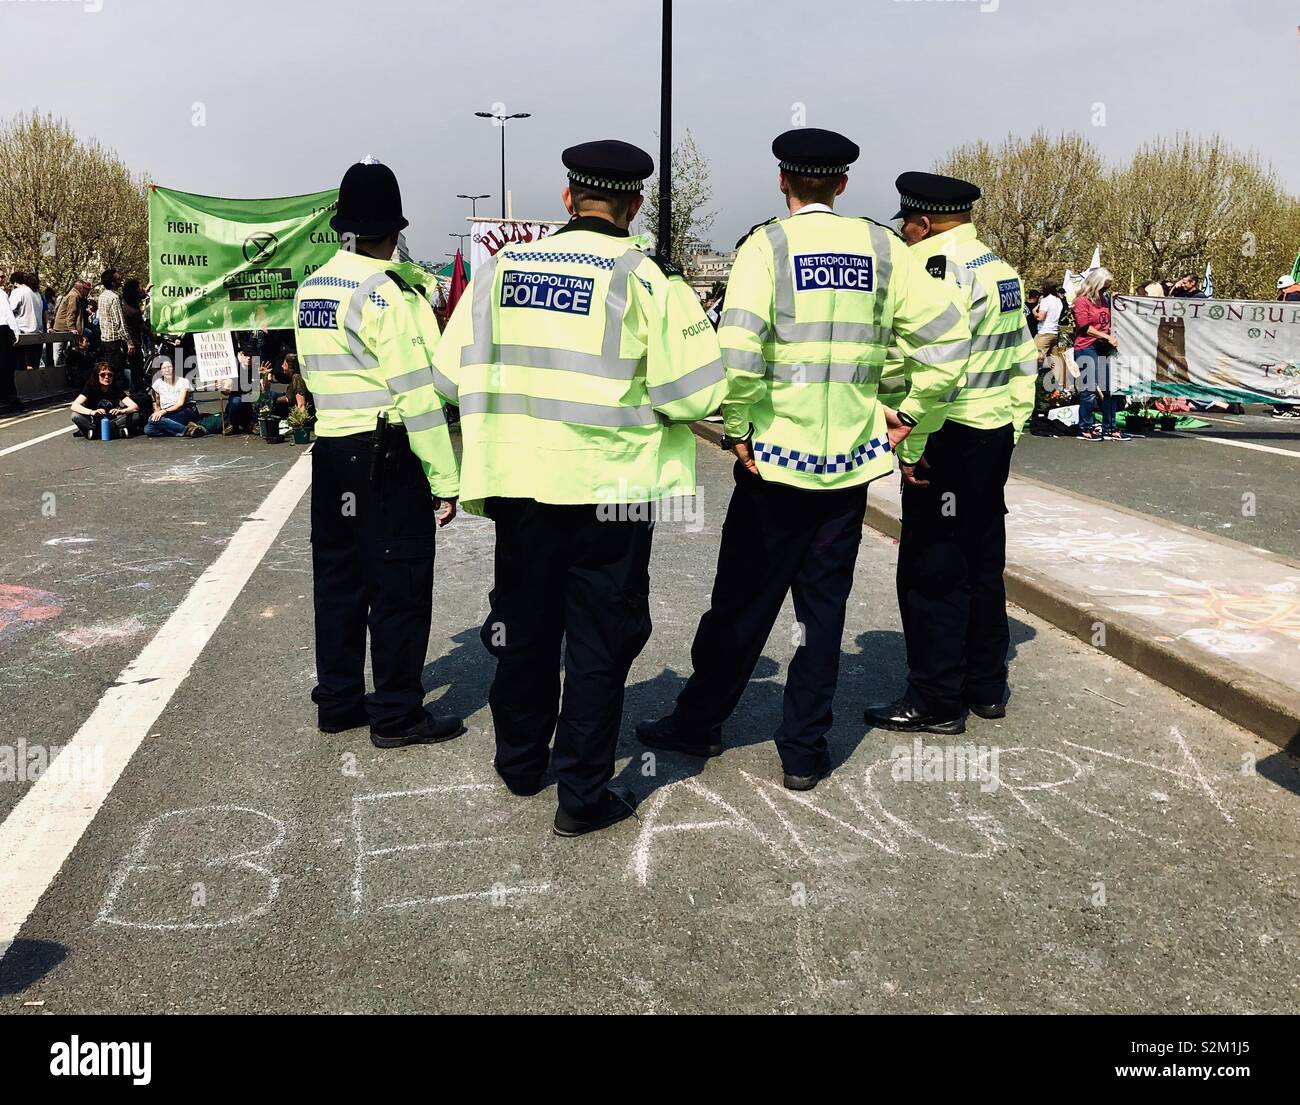 Police gathered in front of the extinction rebellion protest on Waterloo bridge, ‘be angry’ is written in front of them on the road April 2019 Stock Photo